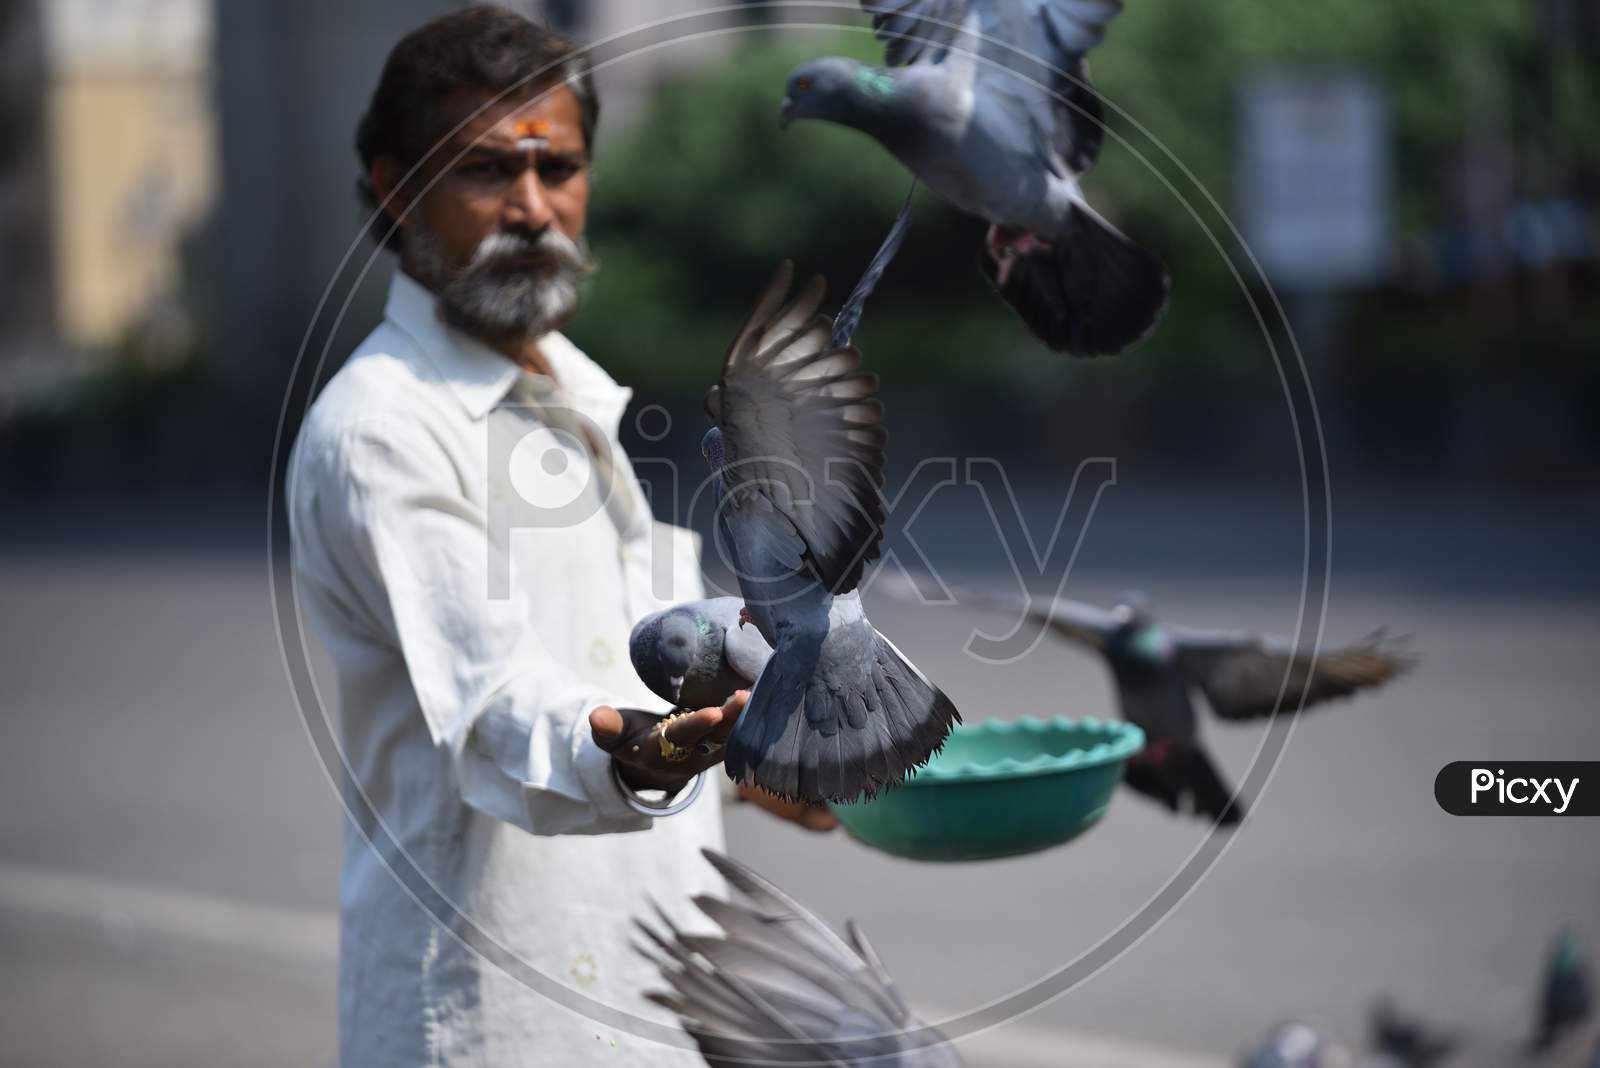 A man feeds pigeons on his hands